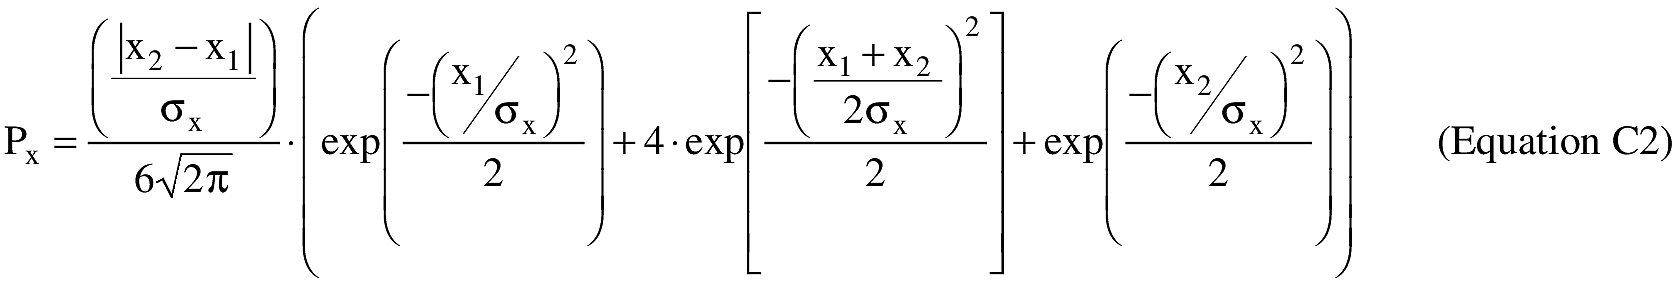 Equation for (A) An applicant shall estimate the probability of final stage impact in the x and y sectors of each populated area within the final stage impact dispersion area using equations C2 and C3